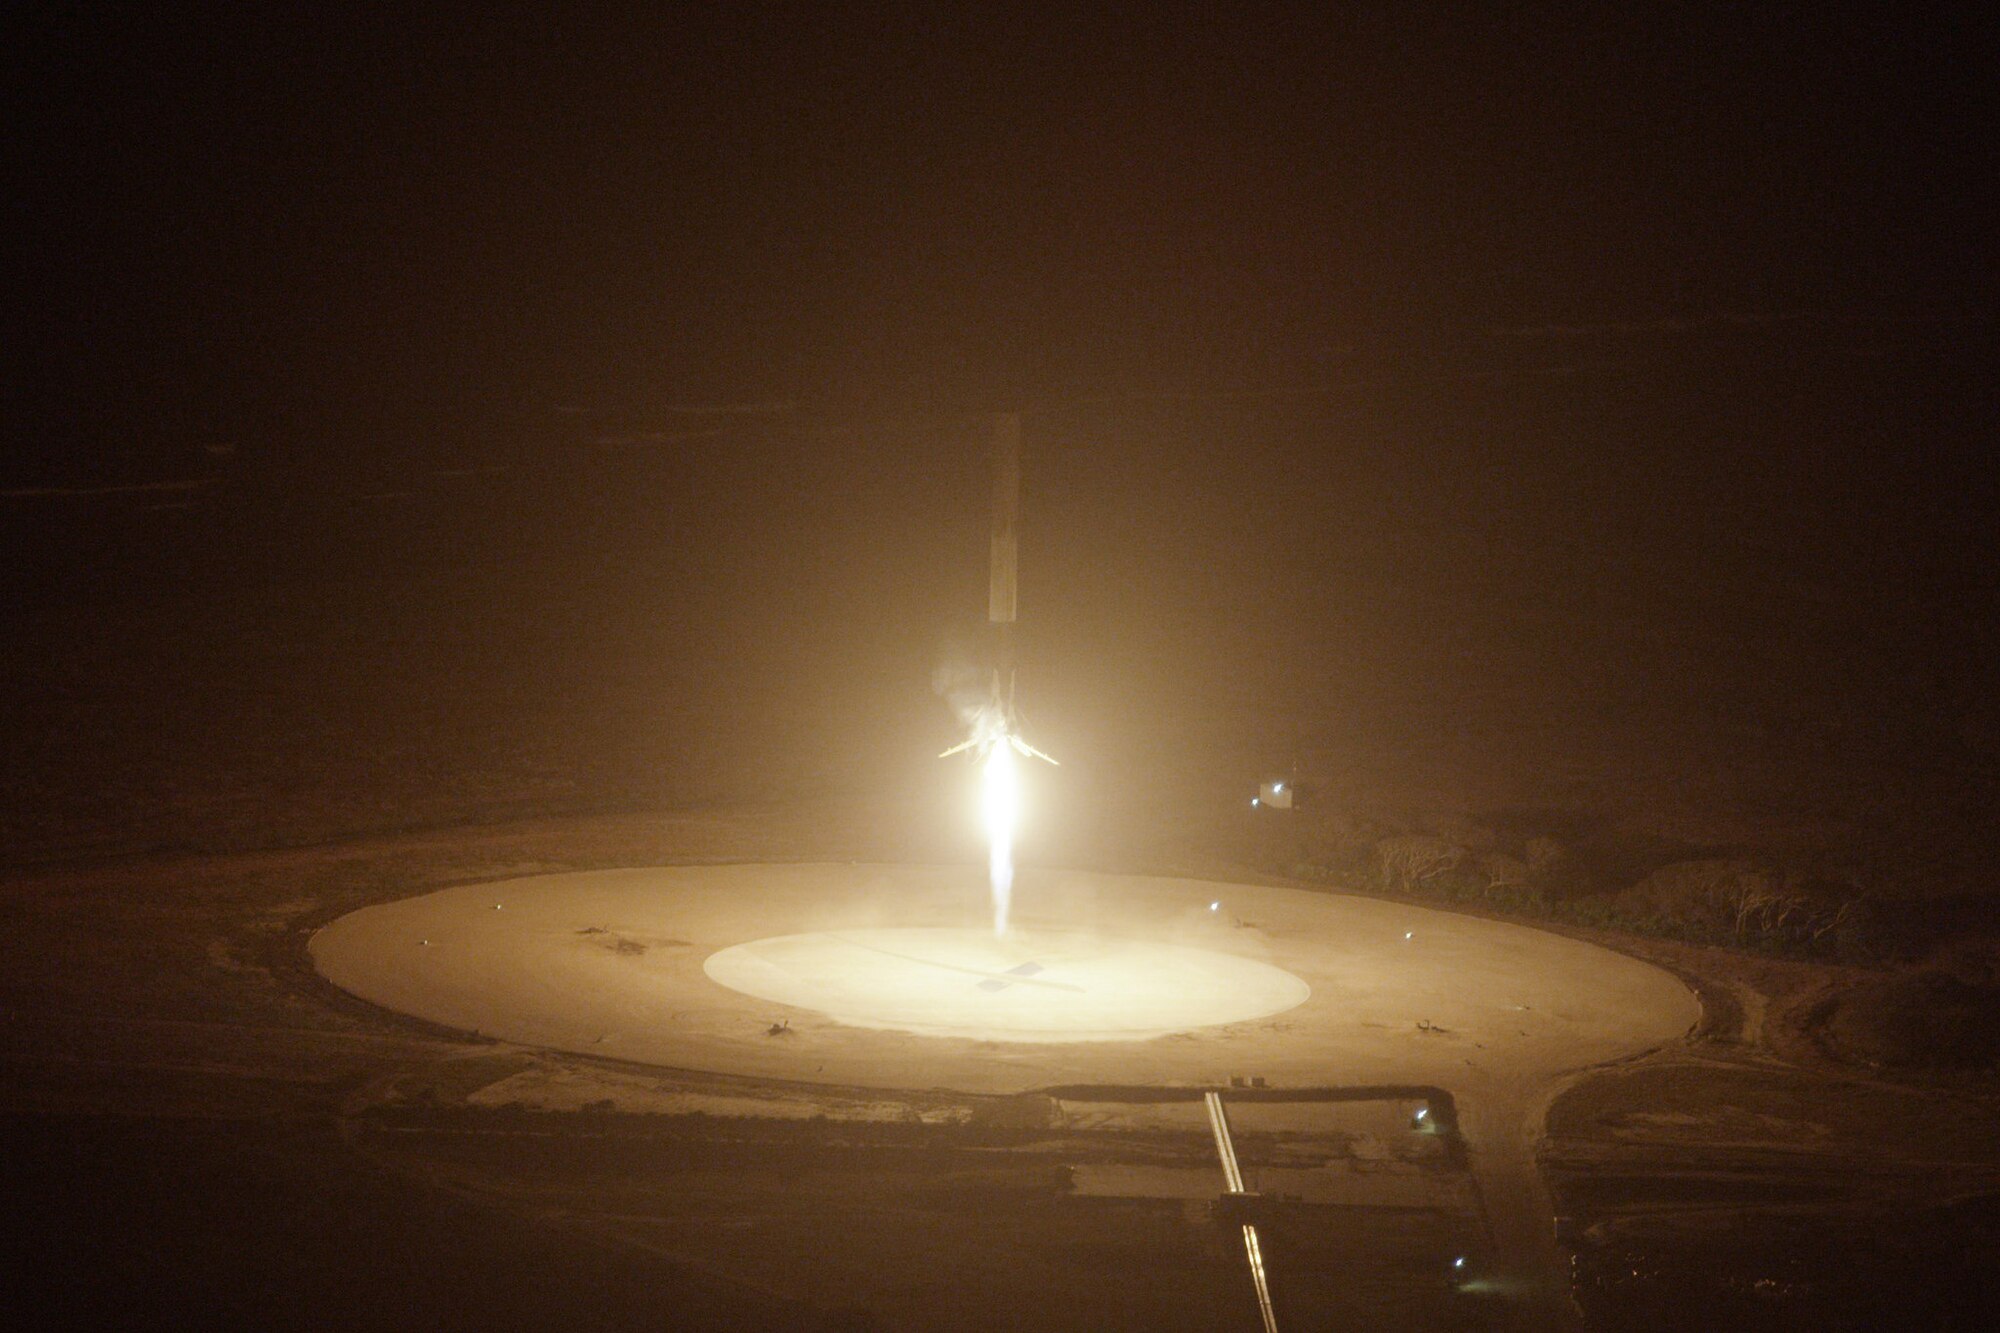 A SpaceX Falcon 9 rocket settles gently back to Earth at Landing Zone 1 (formerly Launch Complex 13) at Cape Canaveral Air Force Station less than 10 minutes after it took off from Launch Complex 40 a little more than 5 miles north. It marked the first time a rocket delivered satellites to orbit (11 on this particular mission), then returned to land safely. The reservists of the 920th Rescue Wing provide range clearance and safety contingency support for all rocket launches from CCAFS/Kennedy Space Center. (courtesy photo/SpaceX)